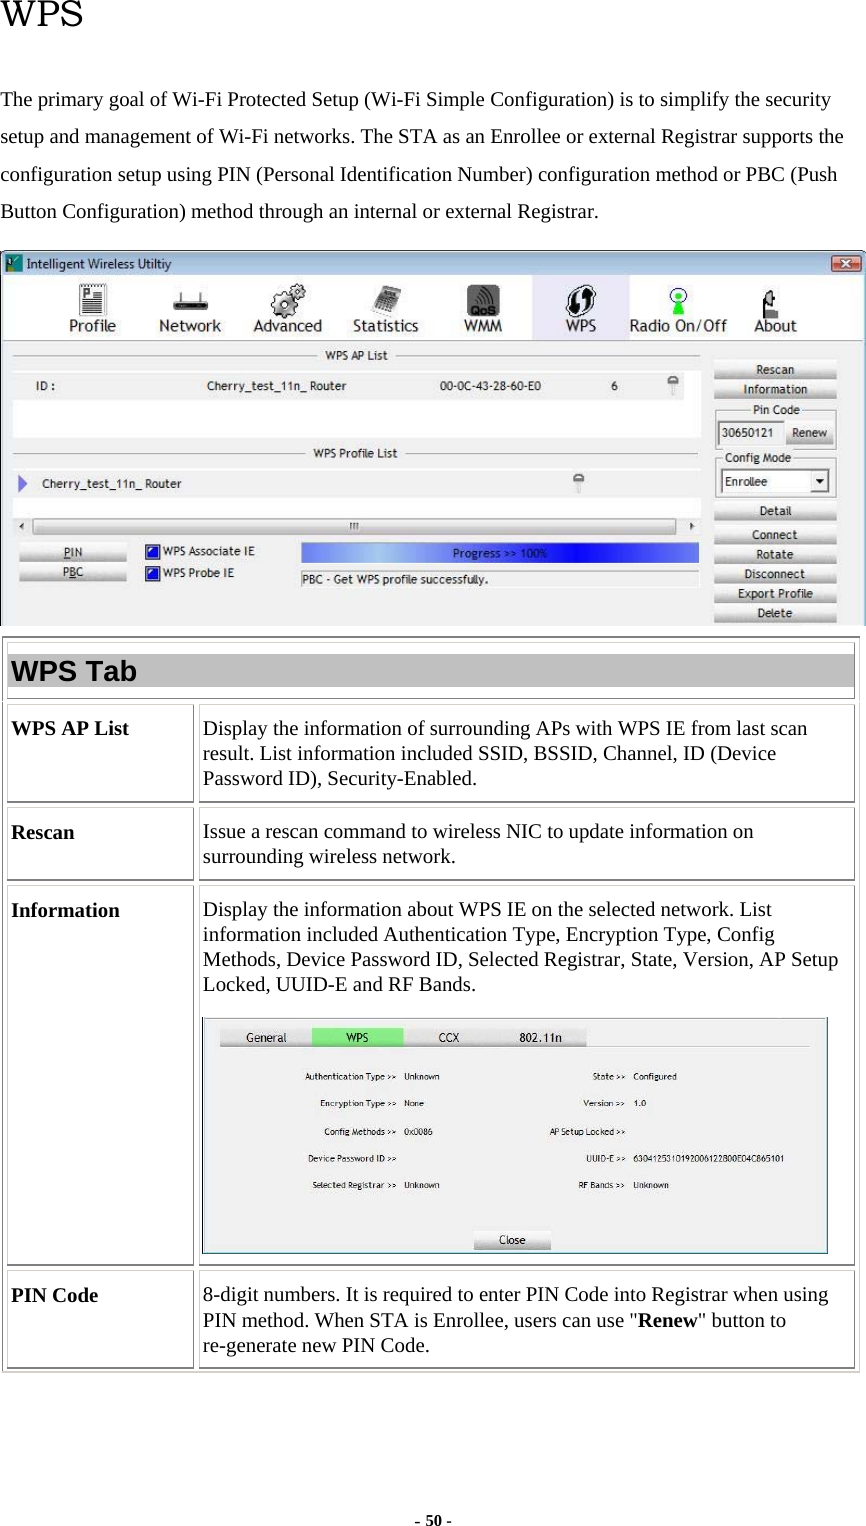  - 50 - WPS The primary goal of Wi-Fi Protected Setup (Wi-Fi Simple Configuration) is to simplify the security setup and management of Wi-Fi networks. The STA as an Enrollee or external Registrar supports the configuration setup using PIN (Personal Identification Number) configuration method or PBC (Push Button Configuration) method through an internal or external Registrar.  WPS Tab WPS AP List  Display the information of surrounding APs with WPS IE from last scan result. List information included SSID, BSSID, Channel, ID (Device Password ID), Security-Enabled. Rescan  Issue a rescan command to wireless NIC to update information on surrounding wireless network. Information  Display the information about WPS IE on the selected network. List information included Authentication Type, Encryption Type, Config Methods, Device Password ID, Selected Registrar, State, Version, AP Setup Locked, UUID-E and RF Bands.  PIN Code  8-digit numbers. It is required to enter PIN Code into Registrar when using PIN method. When STA is Enrollee, users can use &quot;Renew&quot; button to re-generate new PIN Code. 